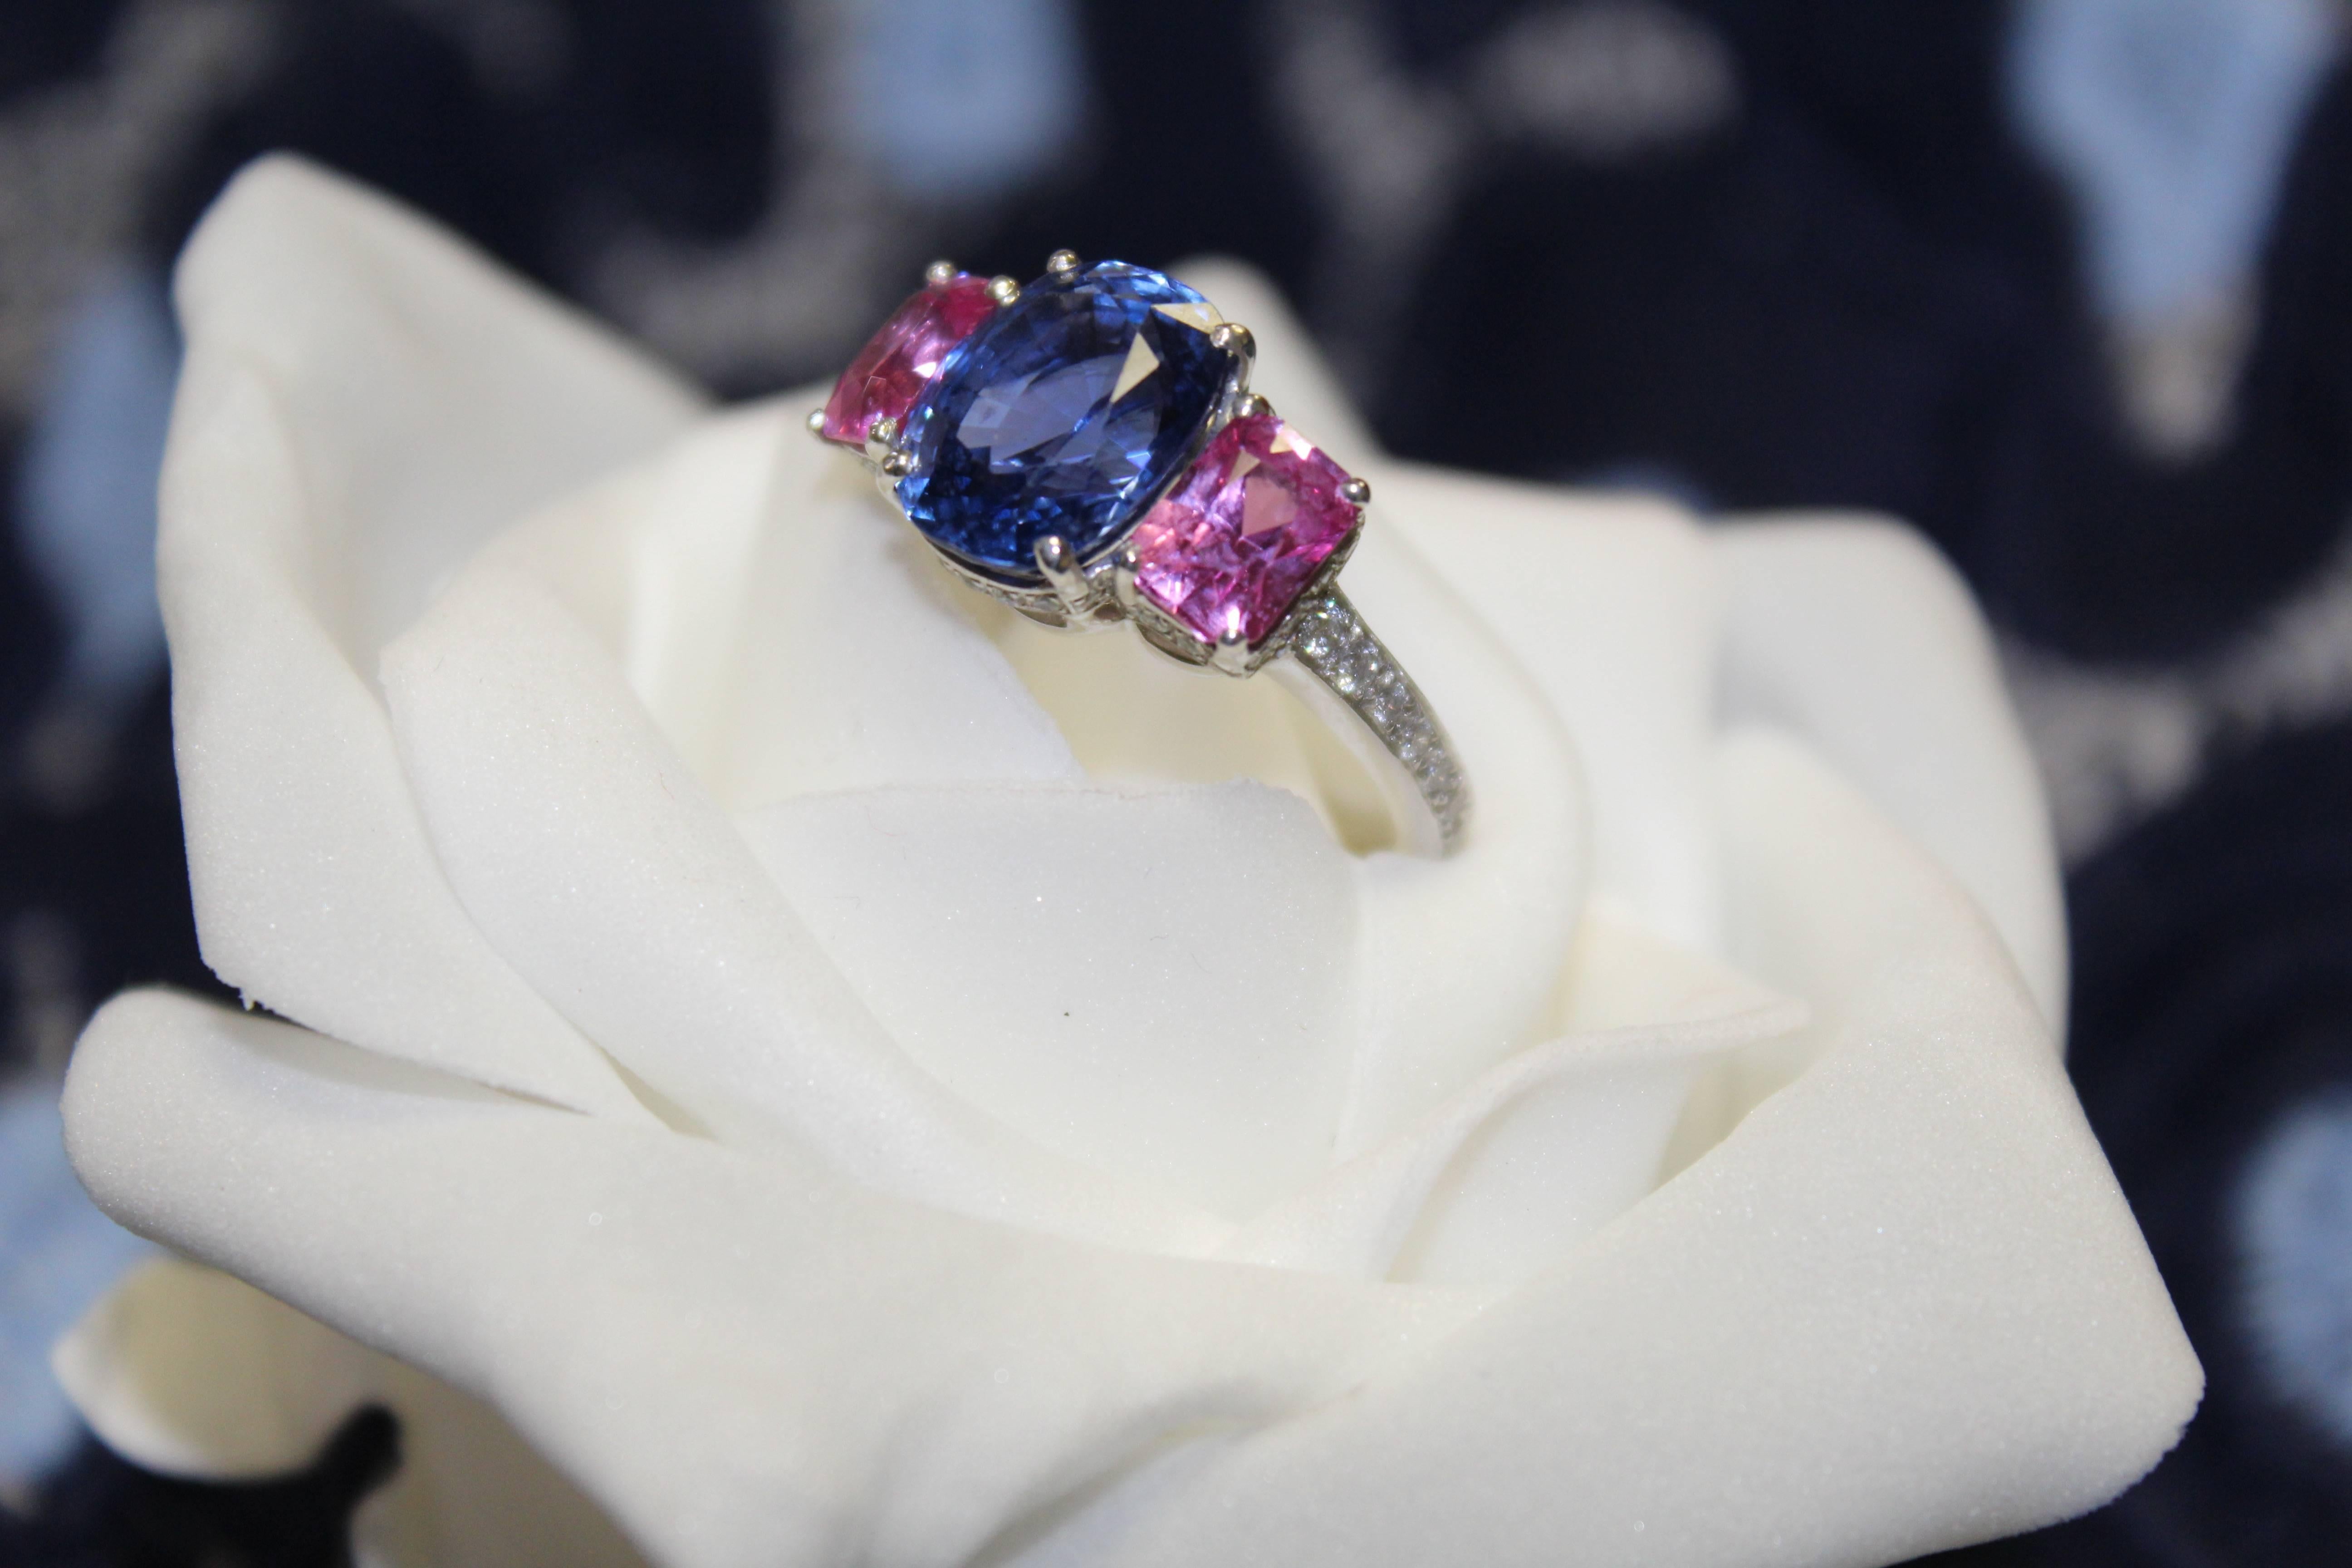 The ´Clarisse’ ring is in 18-carat white gold, set with a central brilliant-cut sapphire weighing 2.20 carats and enhanced by 4 baguette sapphires for a total of 0.60 carat and by 2 round diamonds for a total of 0.03 carat.

The ring is set with a